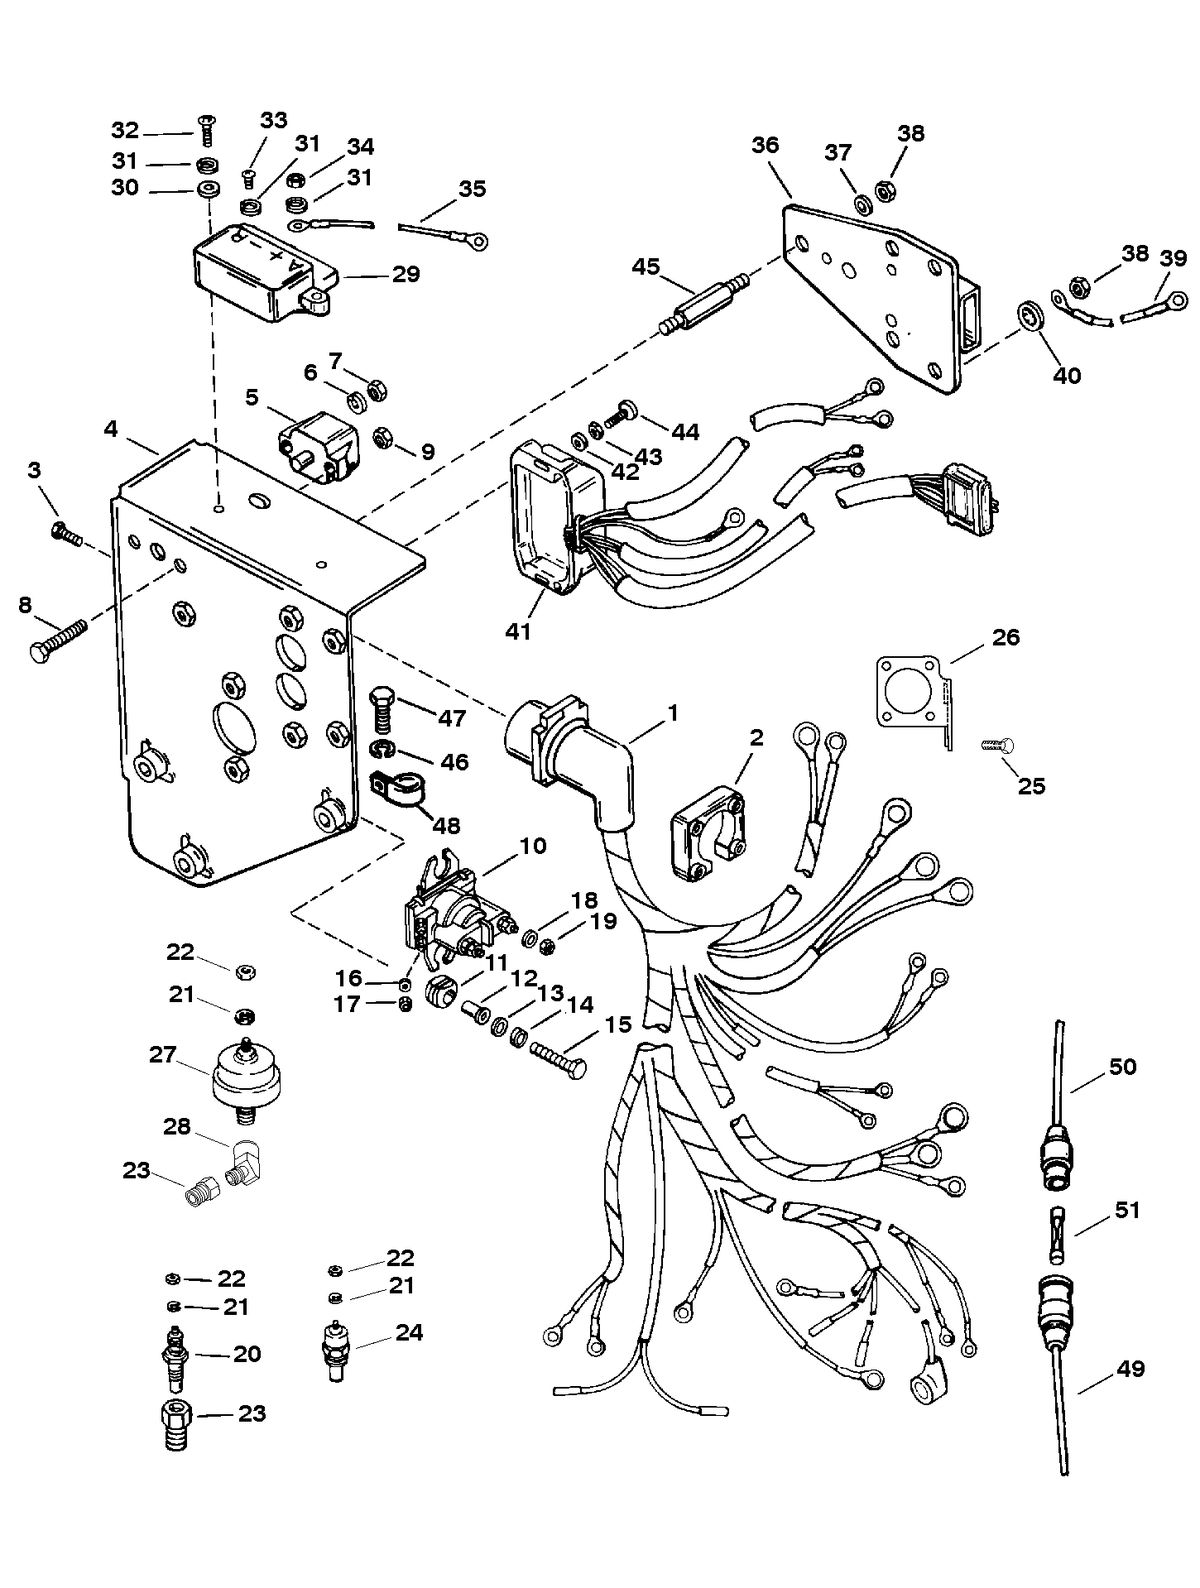 MERCRUISER HP 500 (502 CID) WIRING HARNESS AND ELECTRICAL COMPONENTS